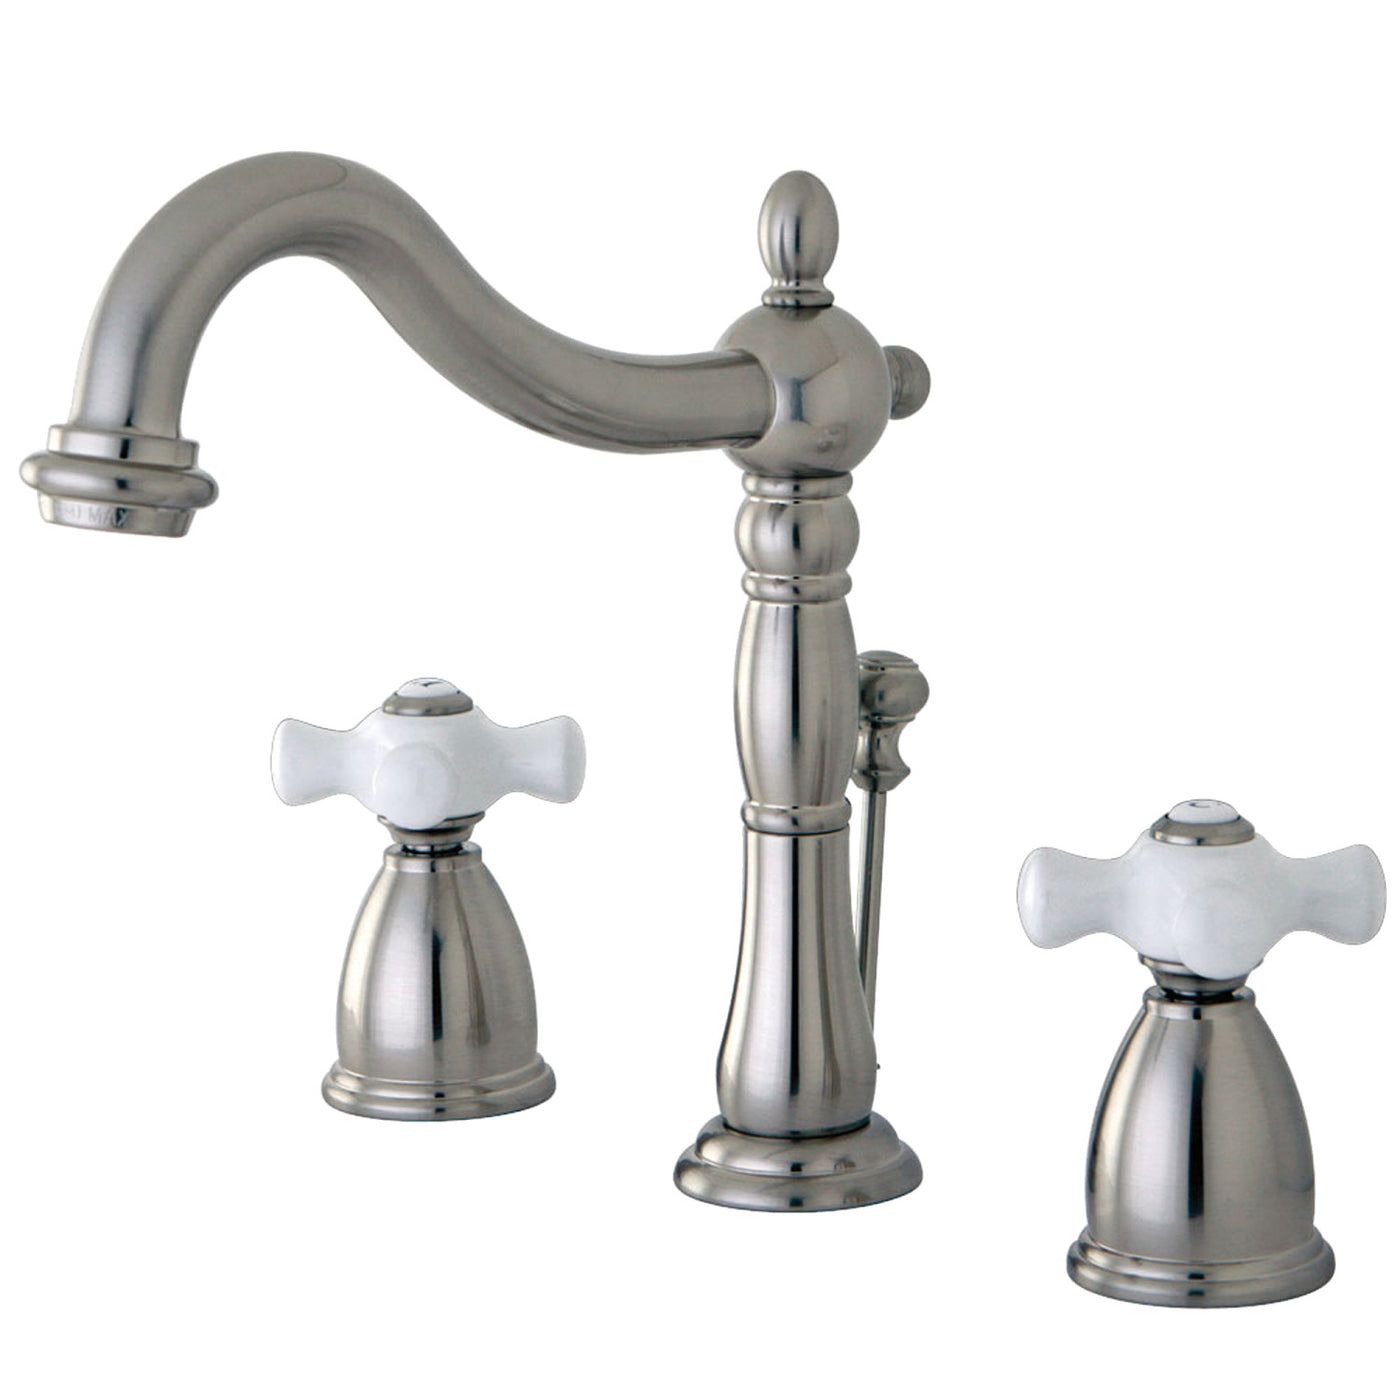 Elements of Design EB1978PX Widespread Bathroom Faucet with Plastic Pop-Up, Brushed Nickel